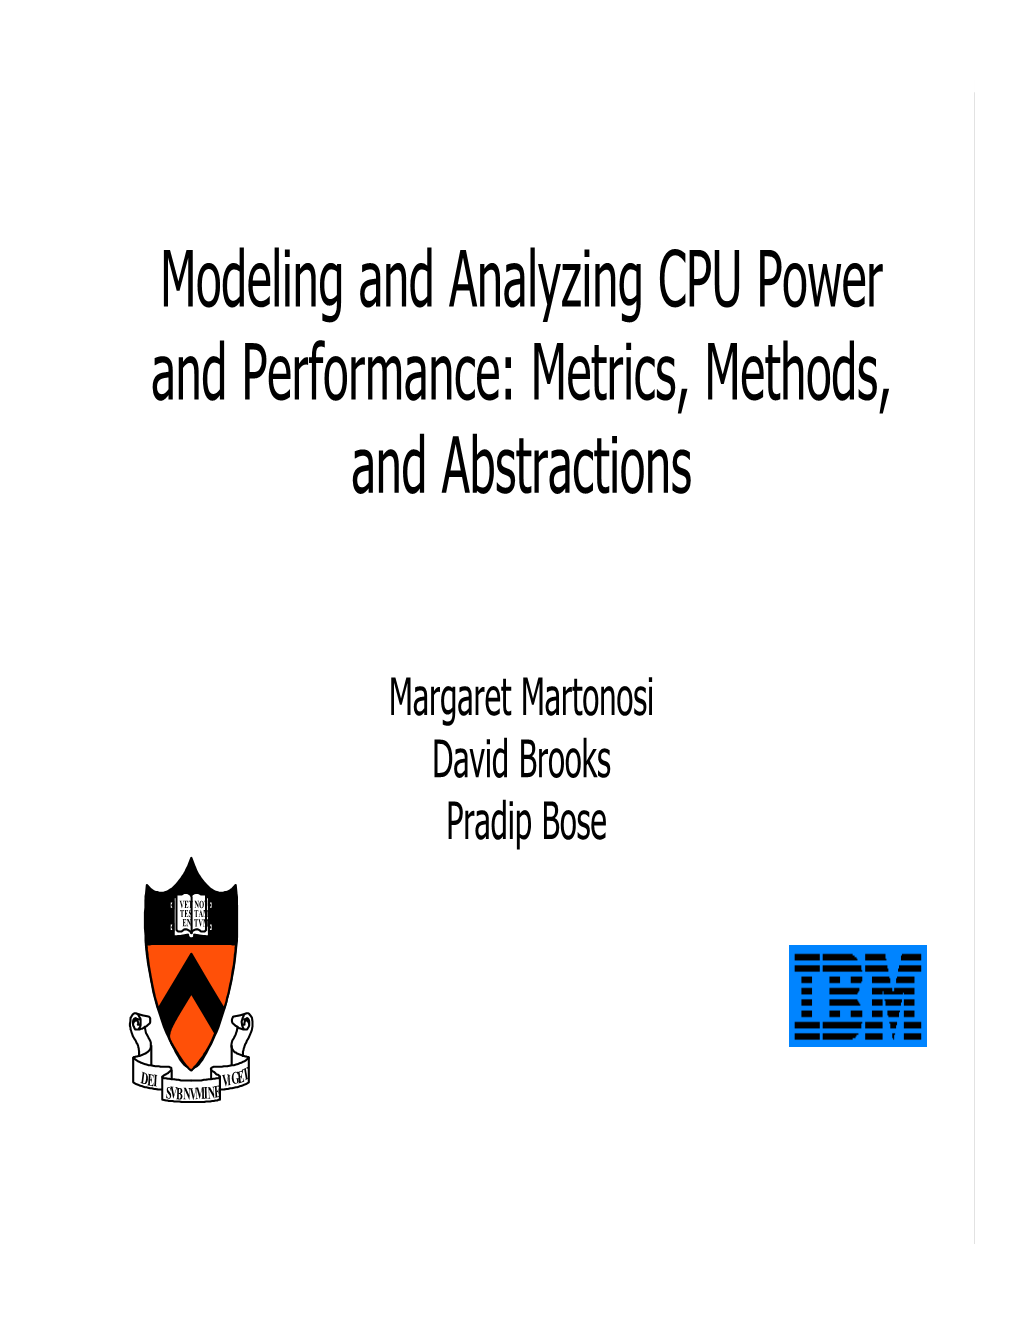 Modeling and Analyzing CPU Power and Performance: Metrics, Methods, and Abstractions